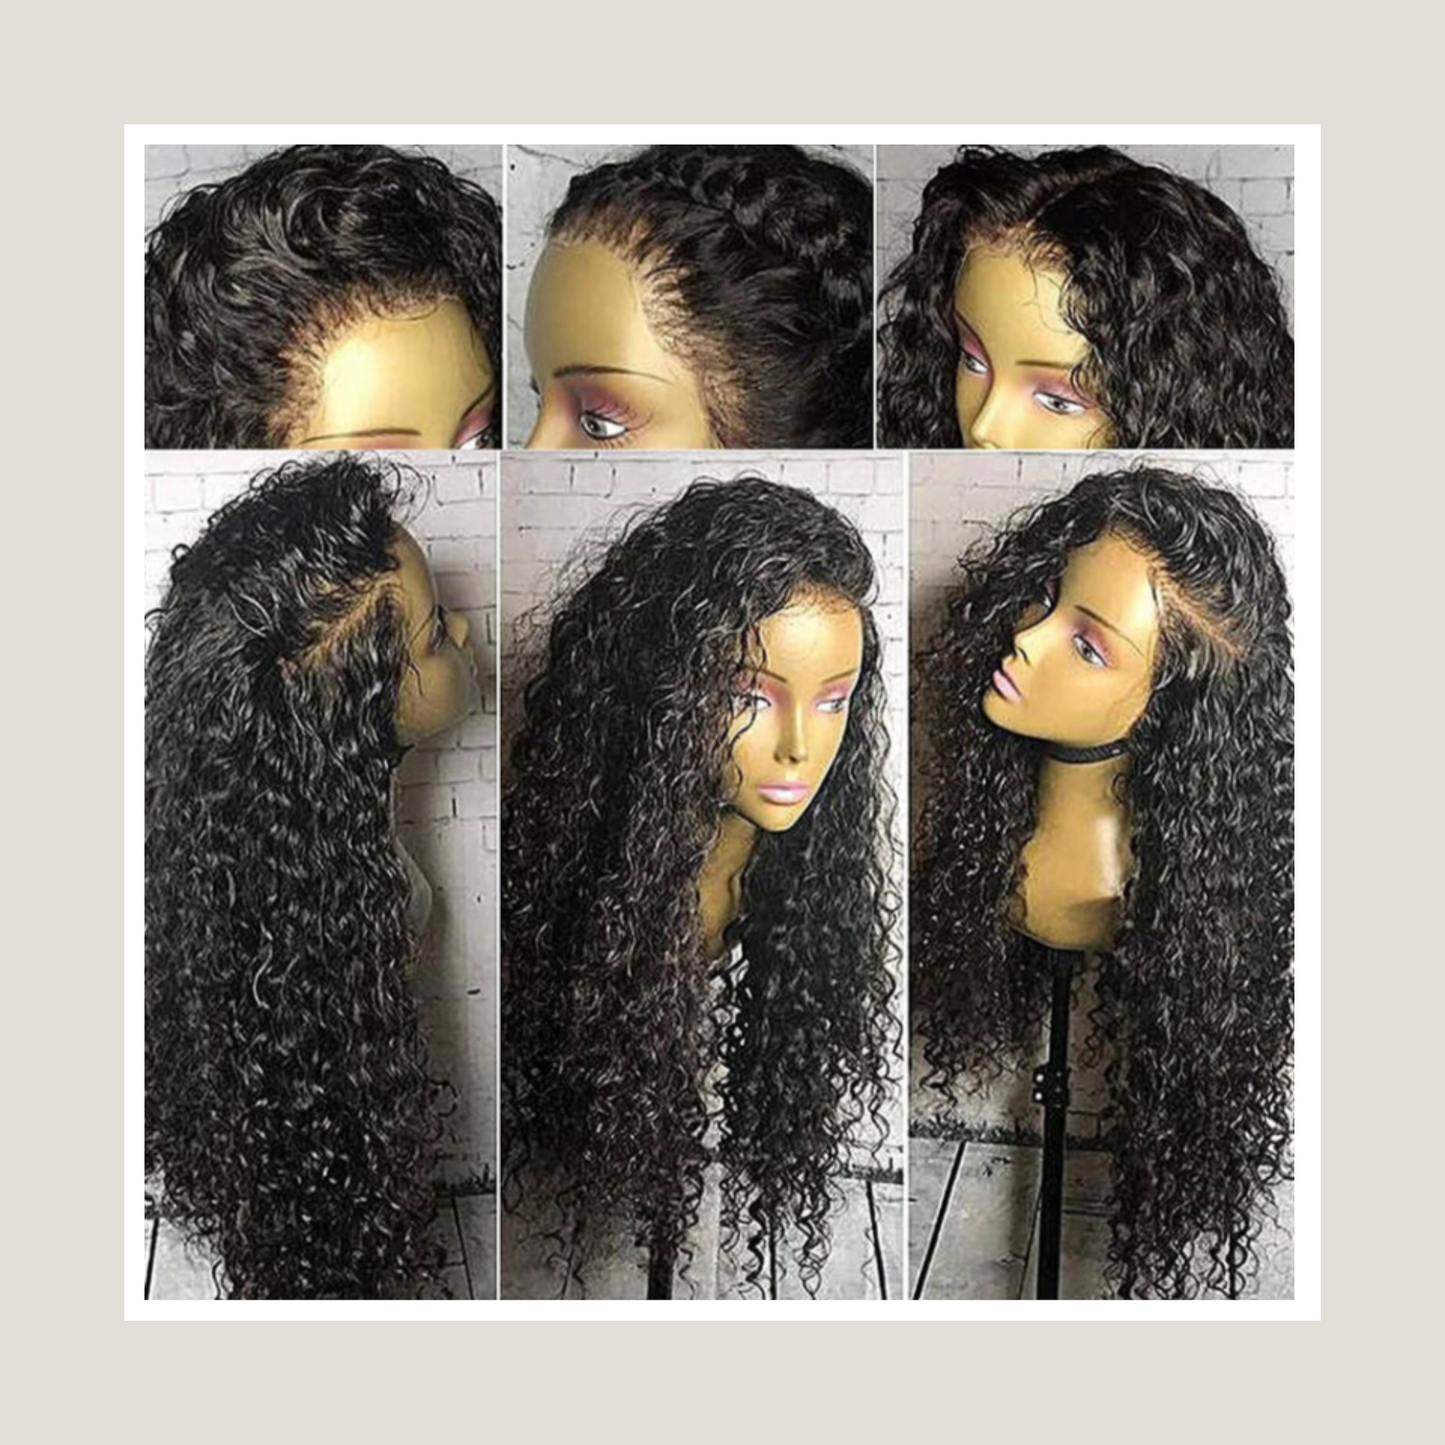 360 Lace Front Human Hair Wigs, 150% Density, Curly, Virgin Hair Lace Frontal Wigs, Full Lace Wigs, Baby Hairs.